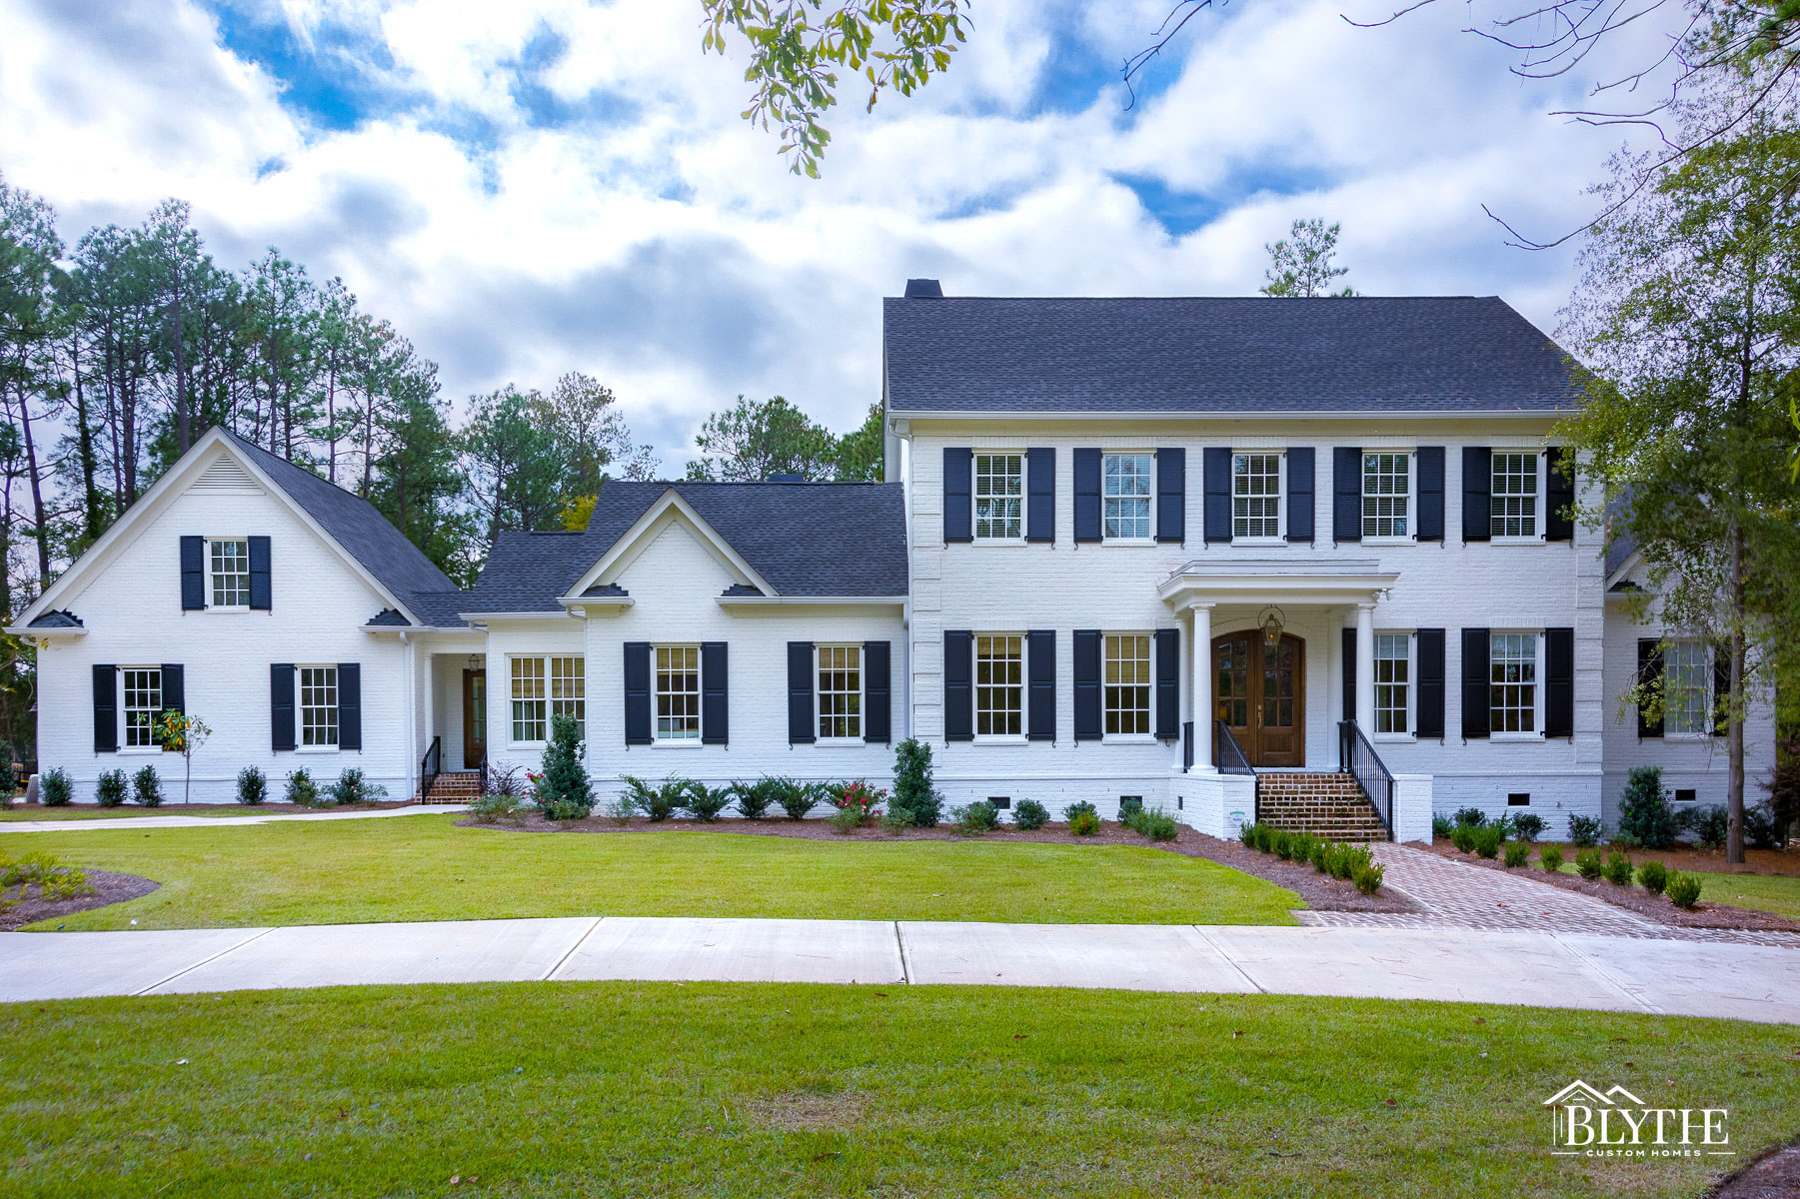 2-story white-painted brick colonial with black shutters and semi-circular driveway.